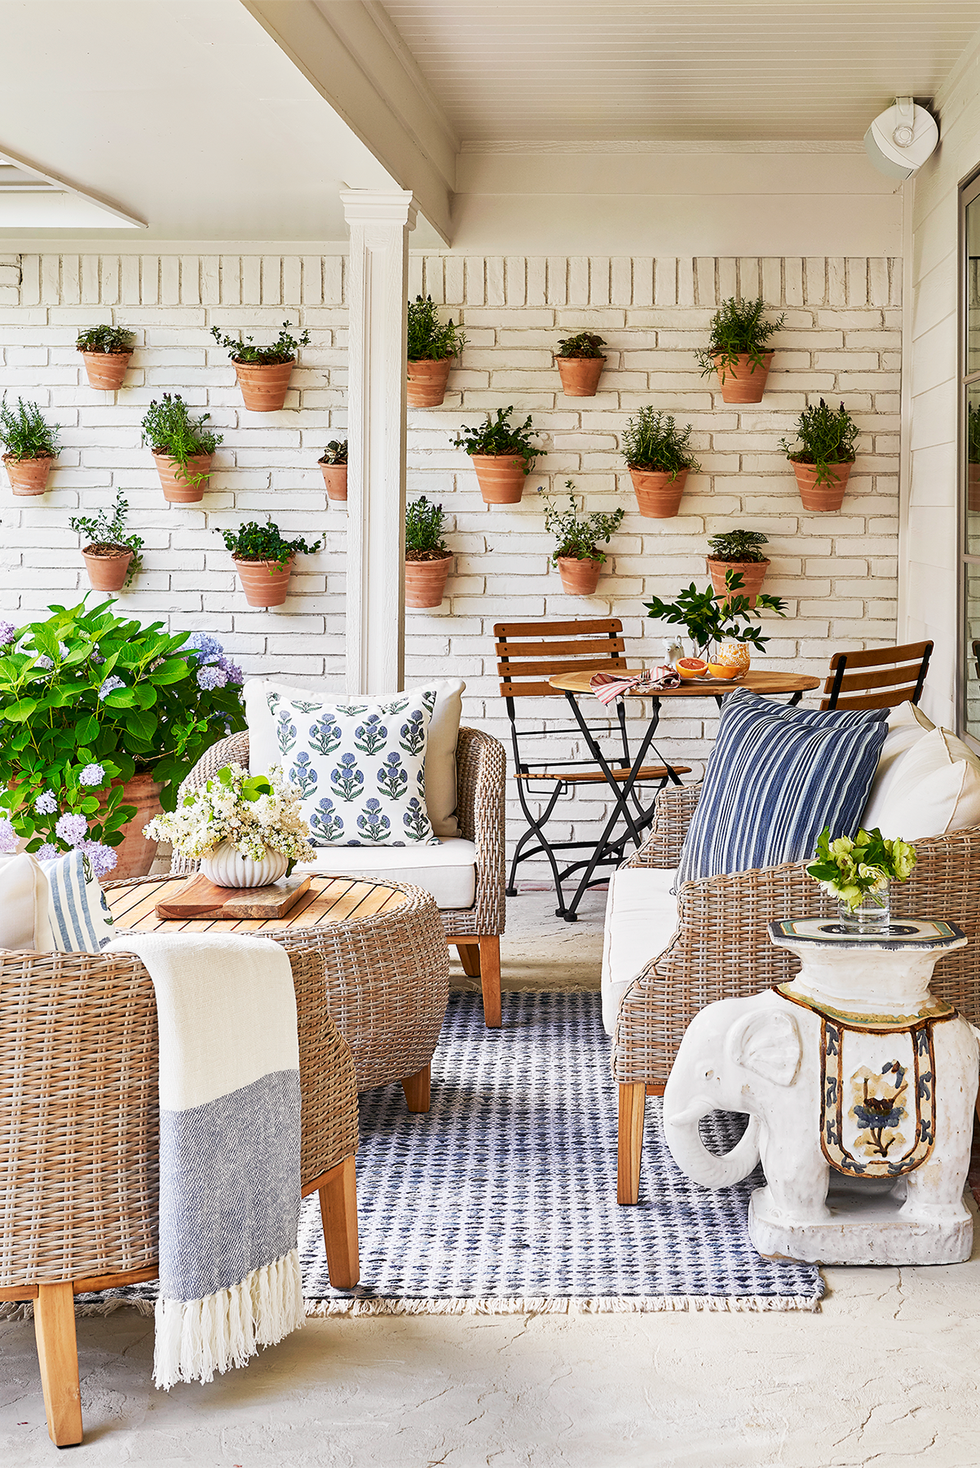 Small Space Patio Outdoor Planters and Decor